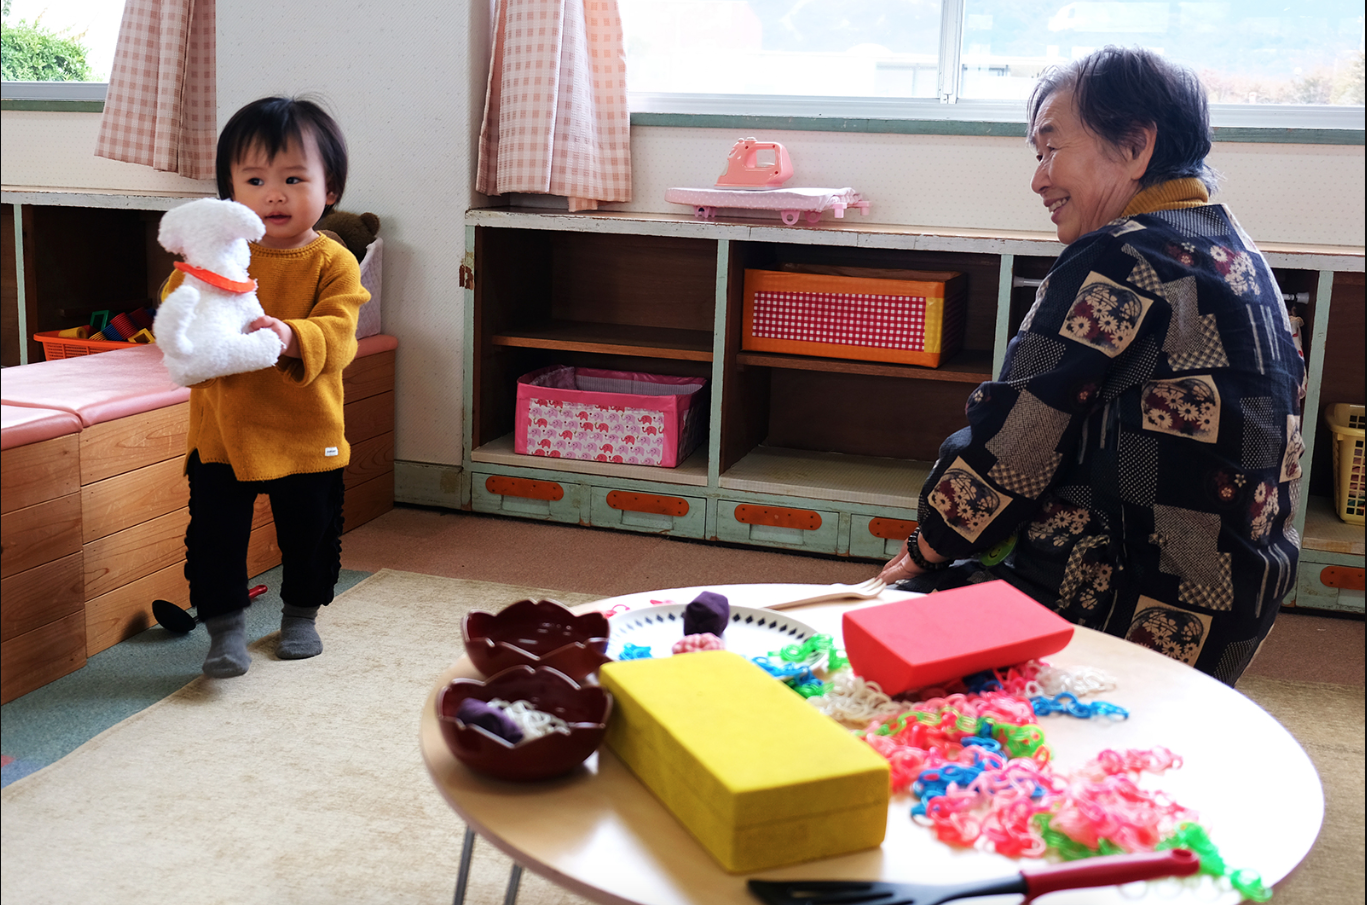 An older volunteer watches over a busy mother's child. Image by Emiko Jozuka. Japan, 2018.